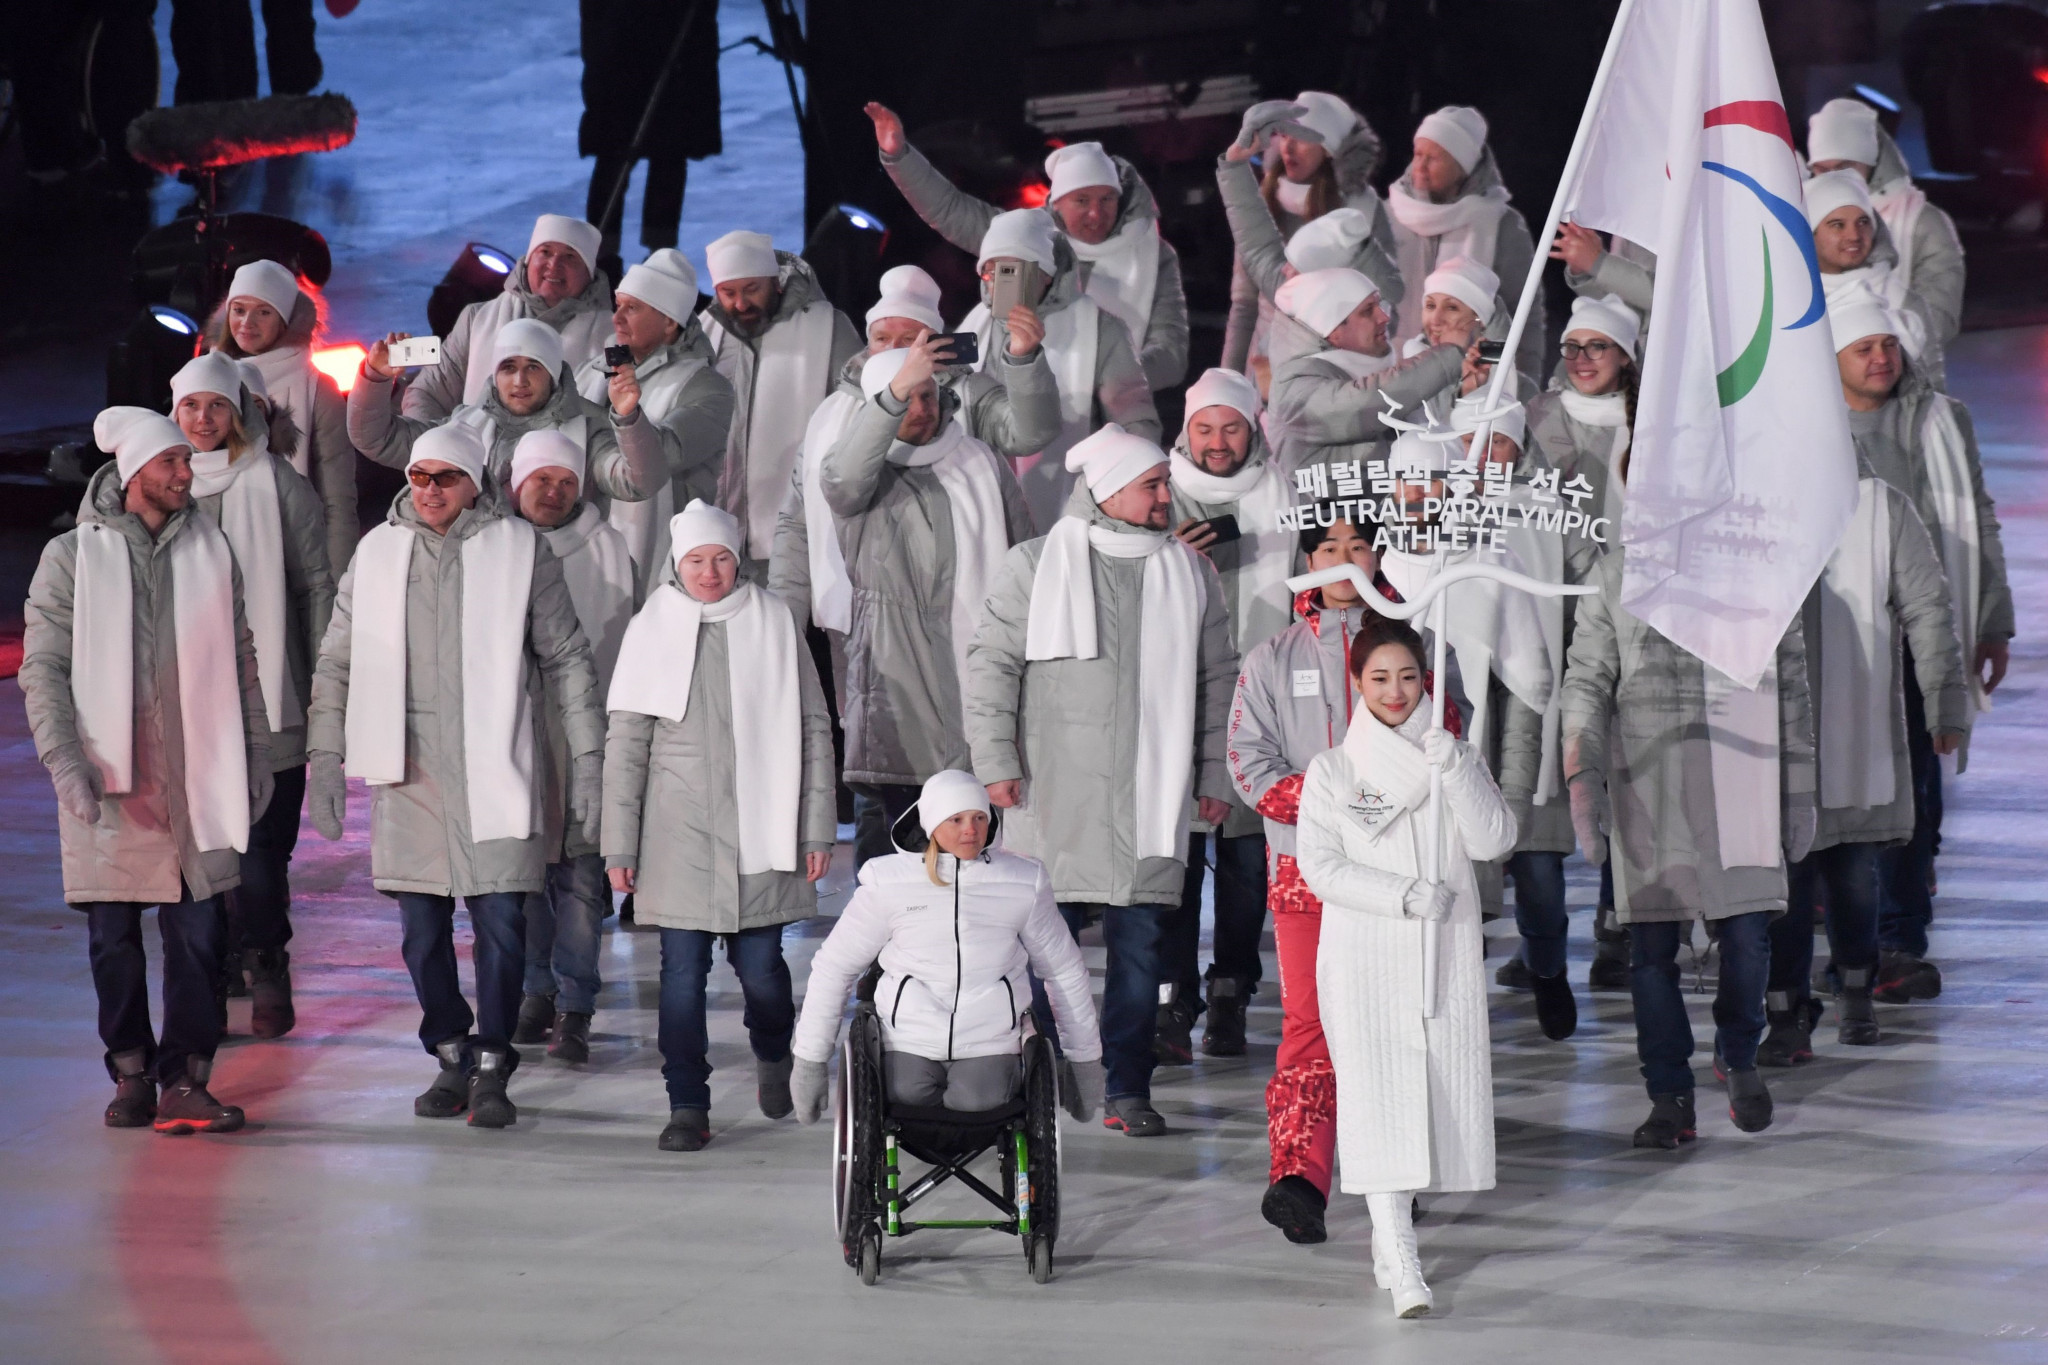 Russia are competing under the banner of Neutral Paralympic Athletes at Pyeongchang 2018 ©Getty Images